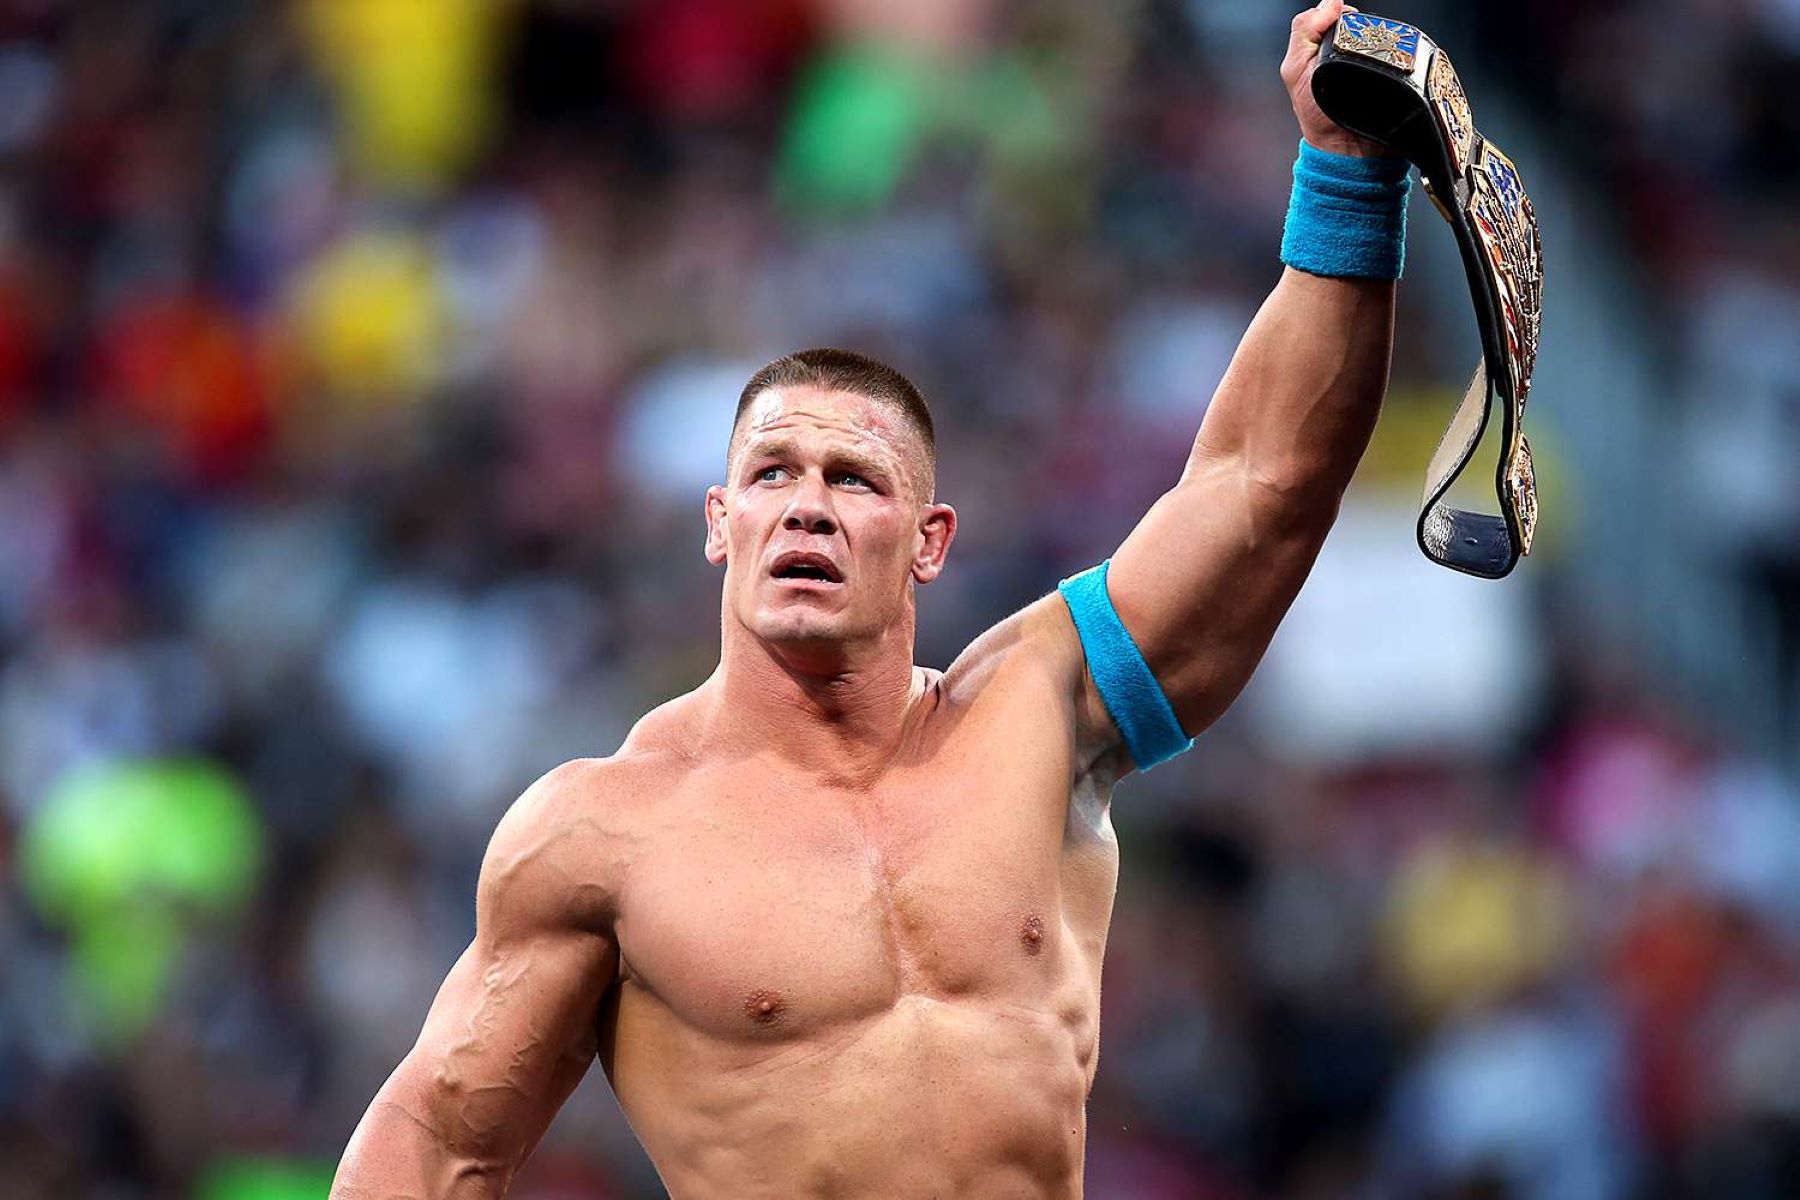 How To Get John Cena's Ripped Physique Naturally